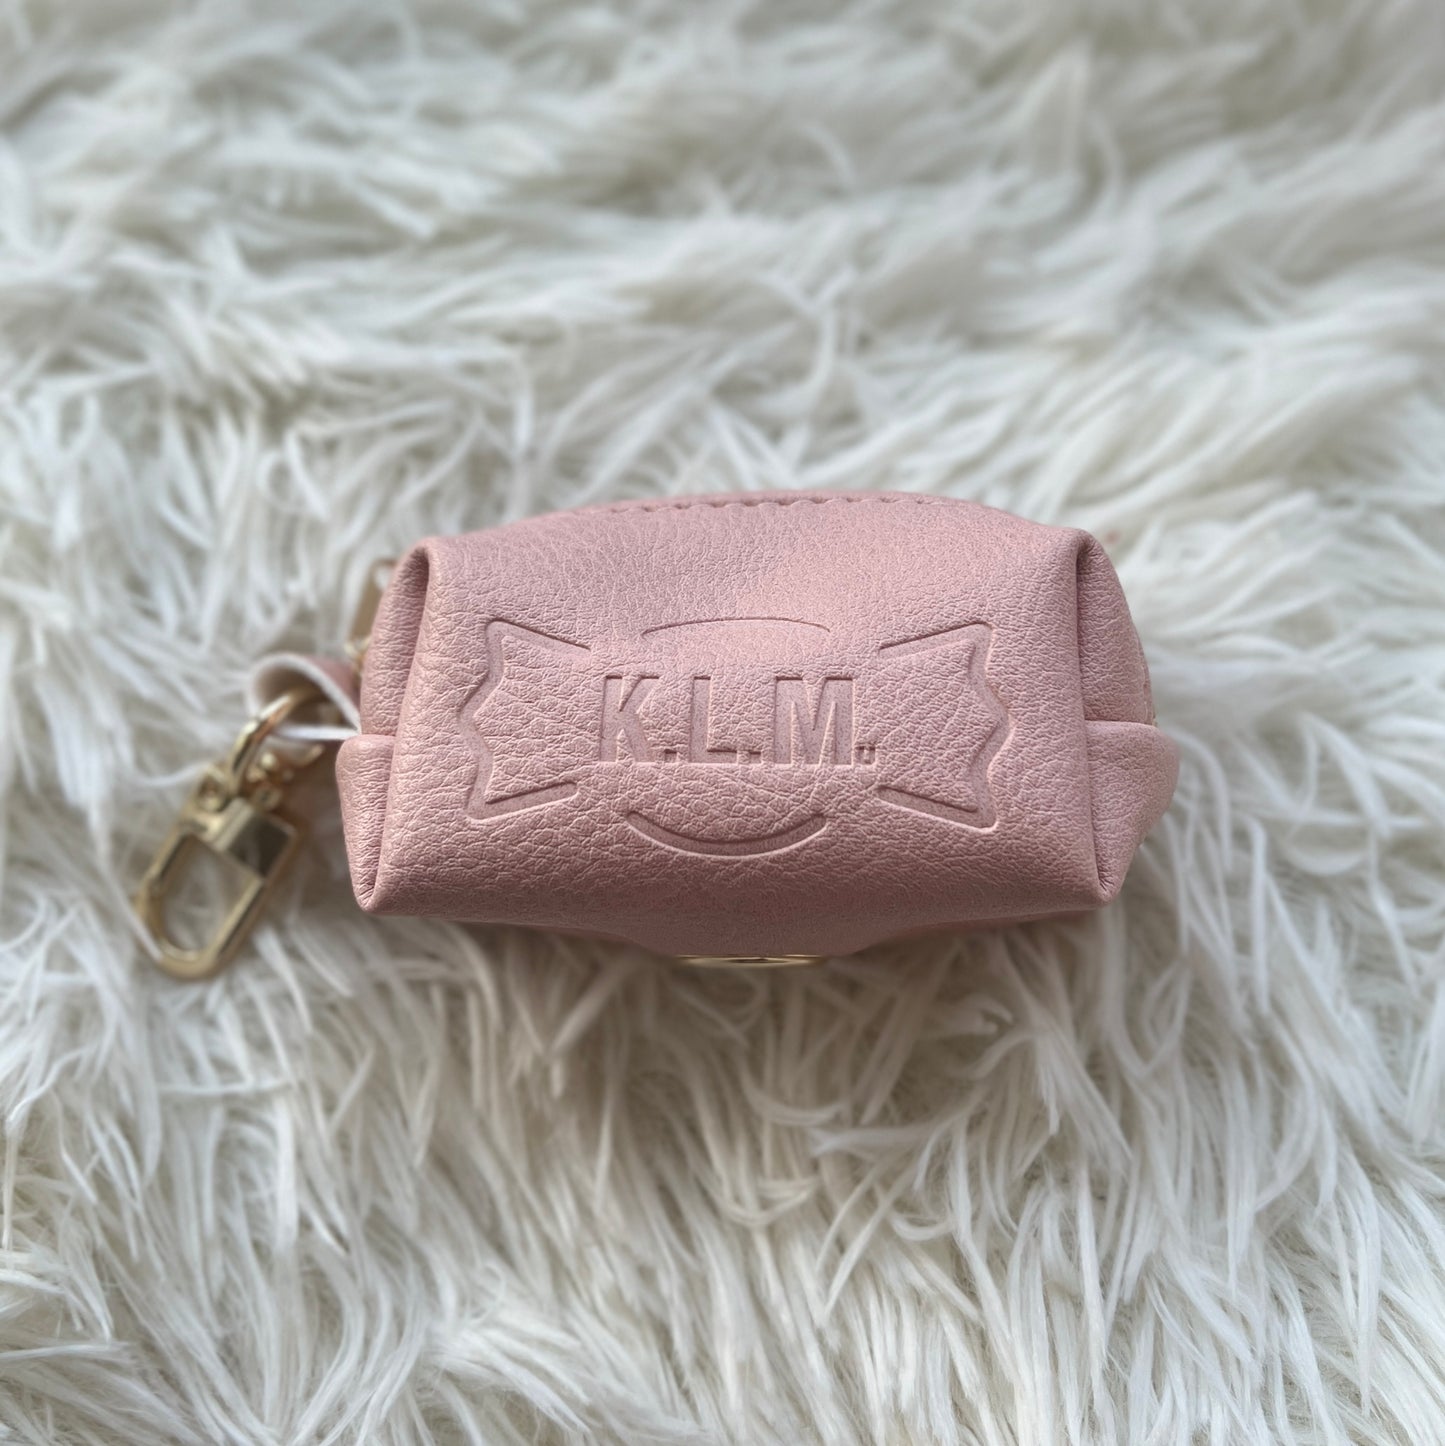 Embossed Logo Manner Pouch / エンボスロゴマナーポーチ